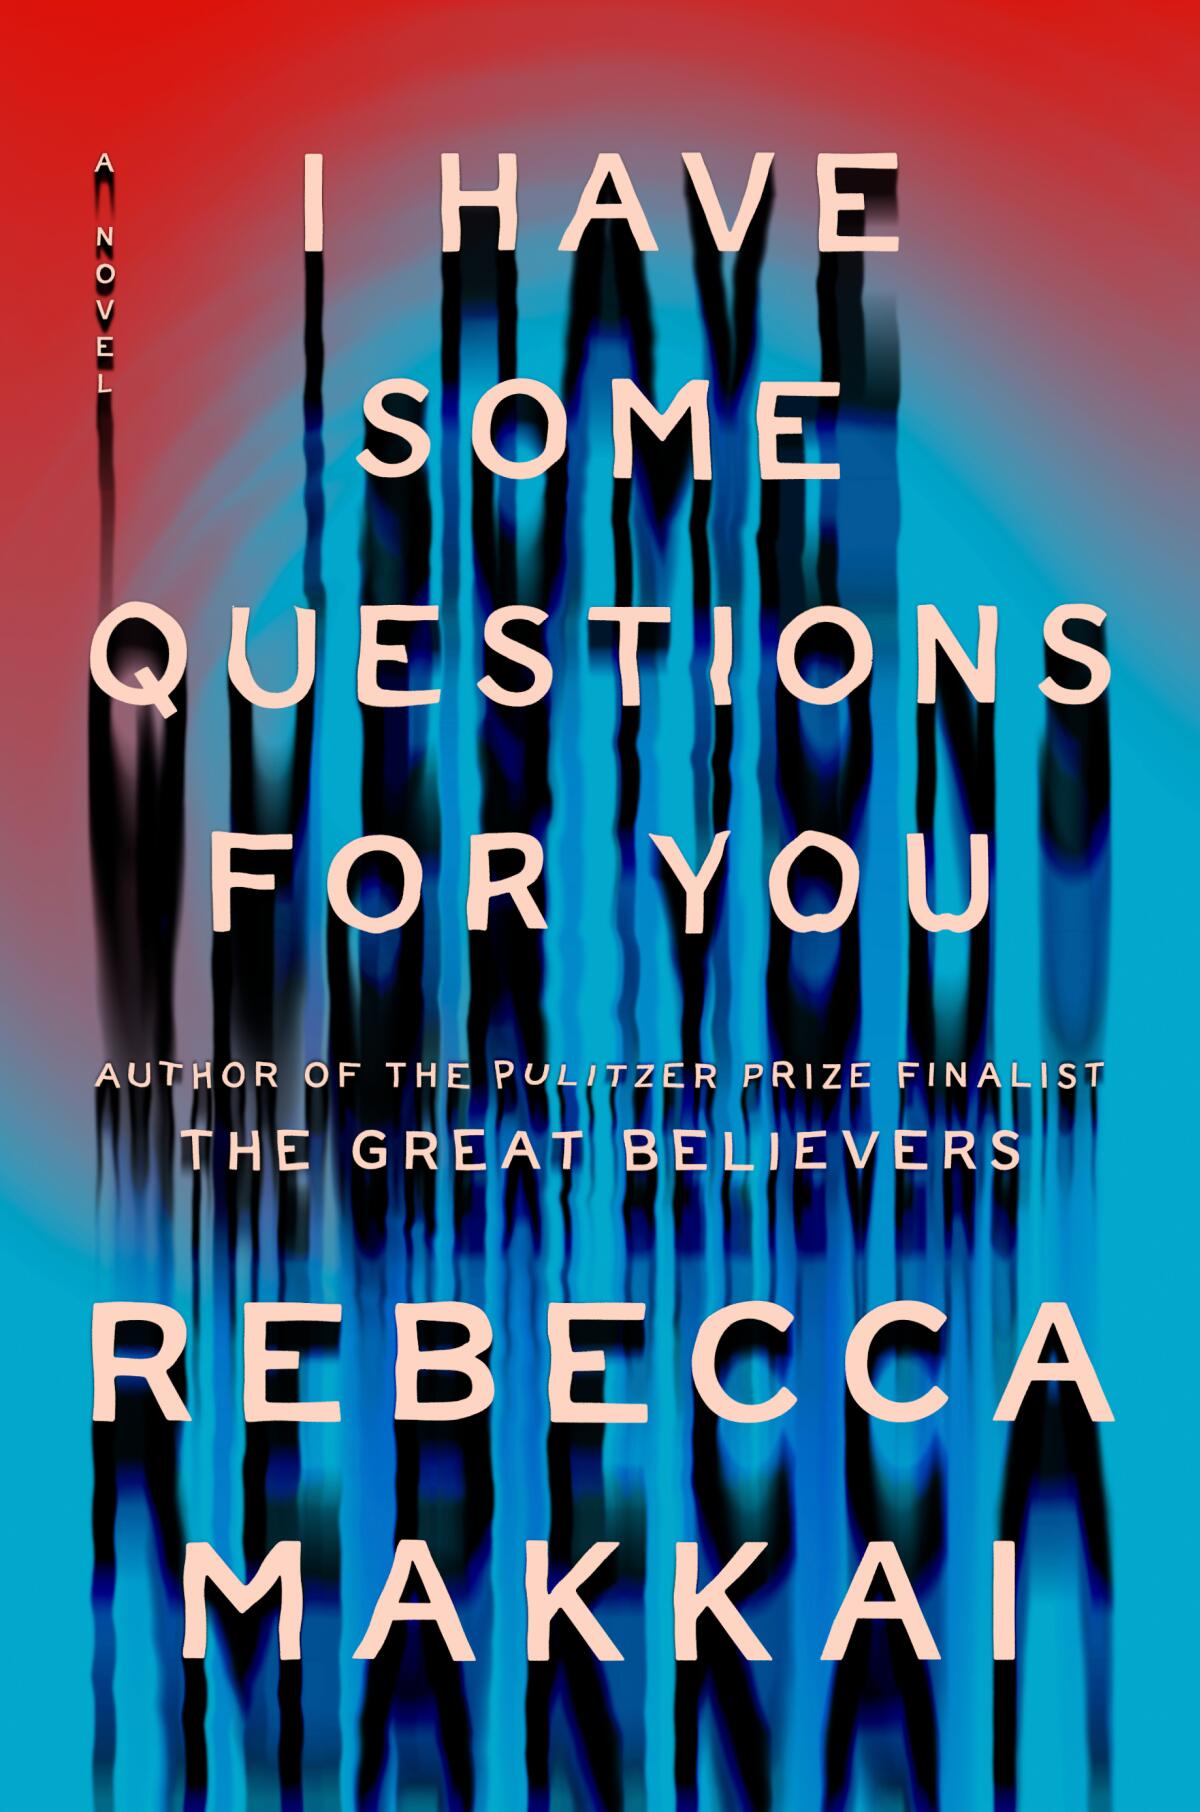 "I Have Some Questions for You," by Rebecca Makkai